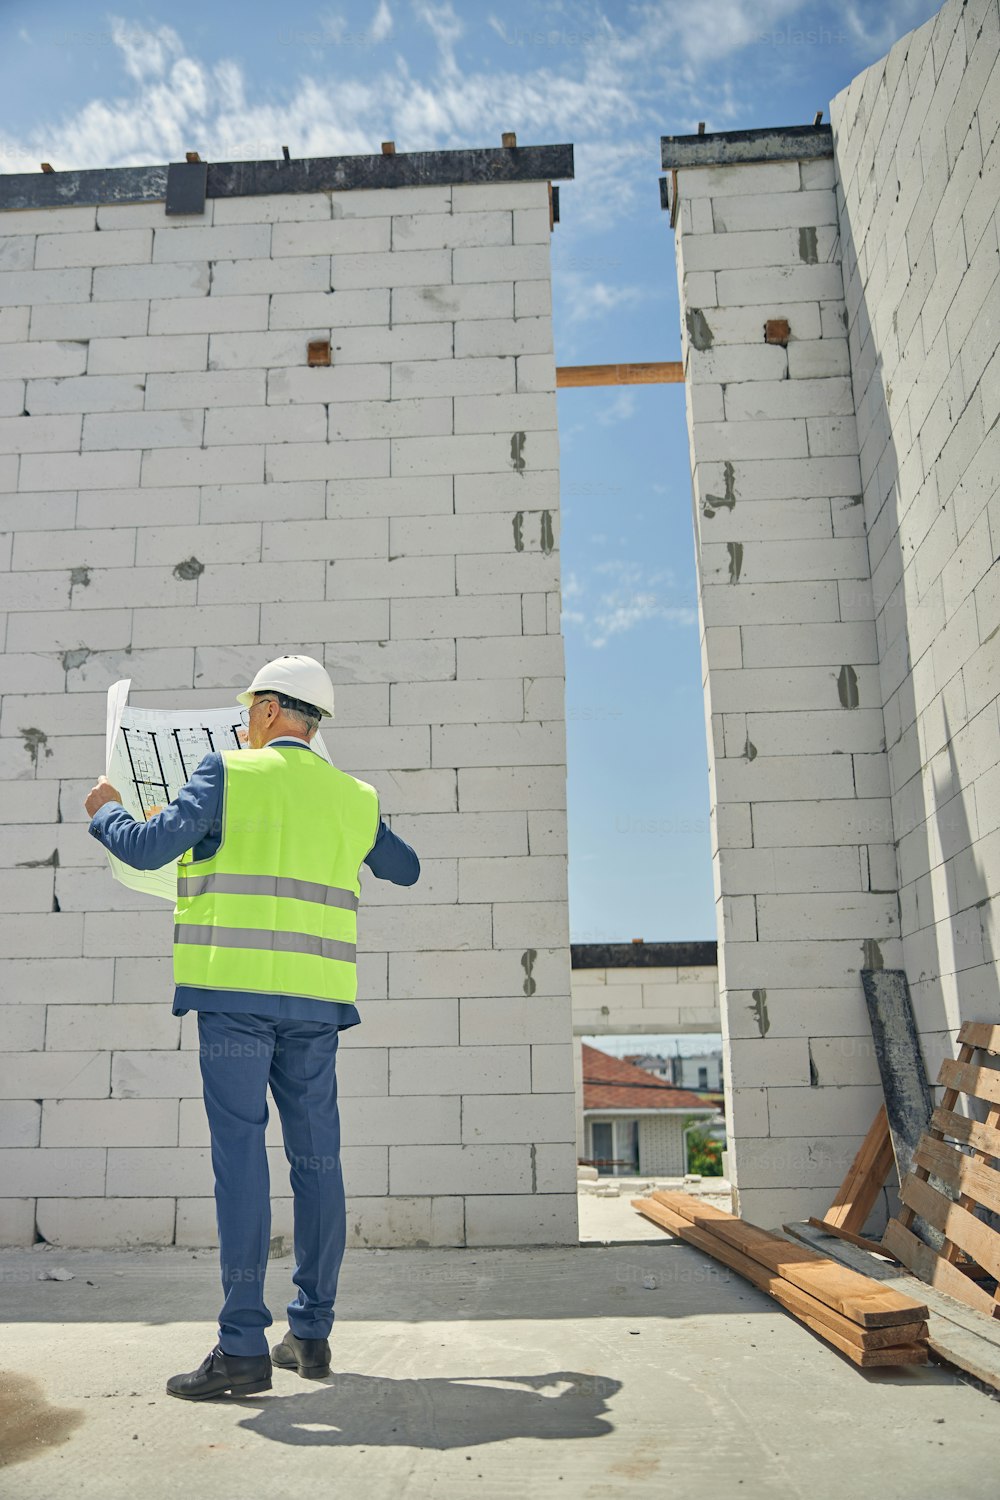 Back view of a grey-haired male worker standing in an unfinished house with bare walls